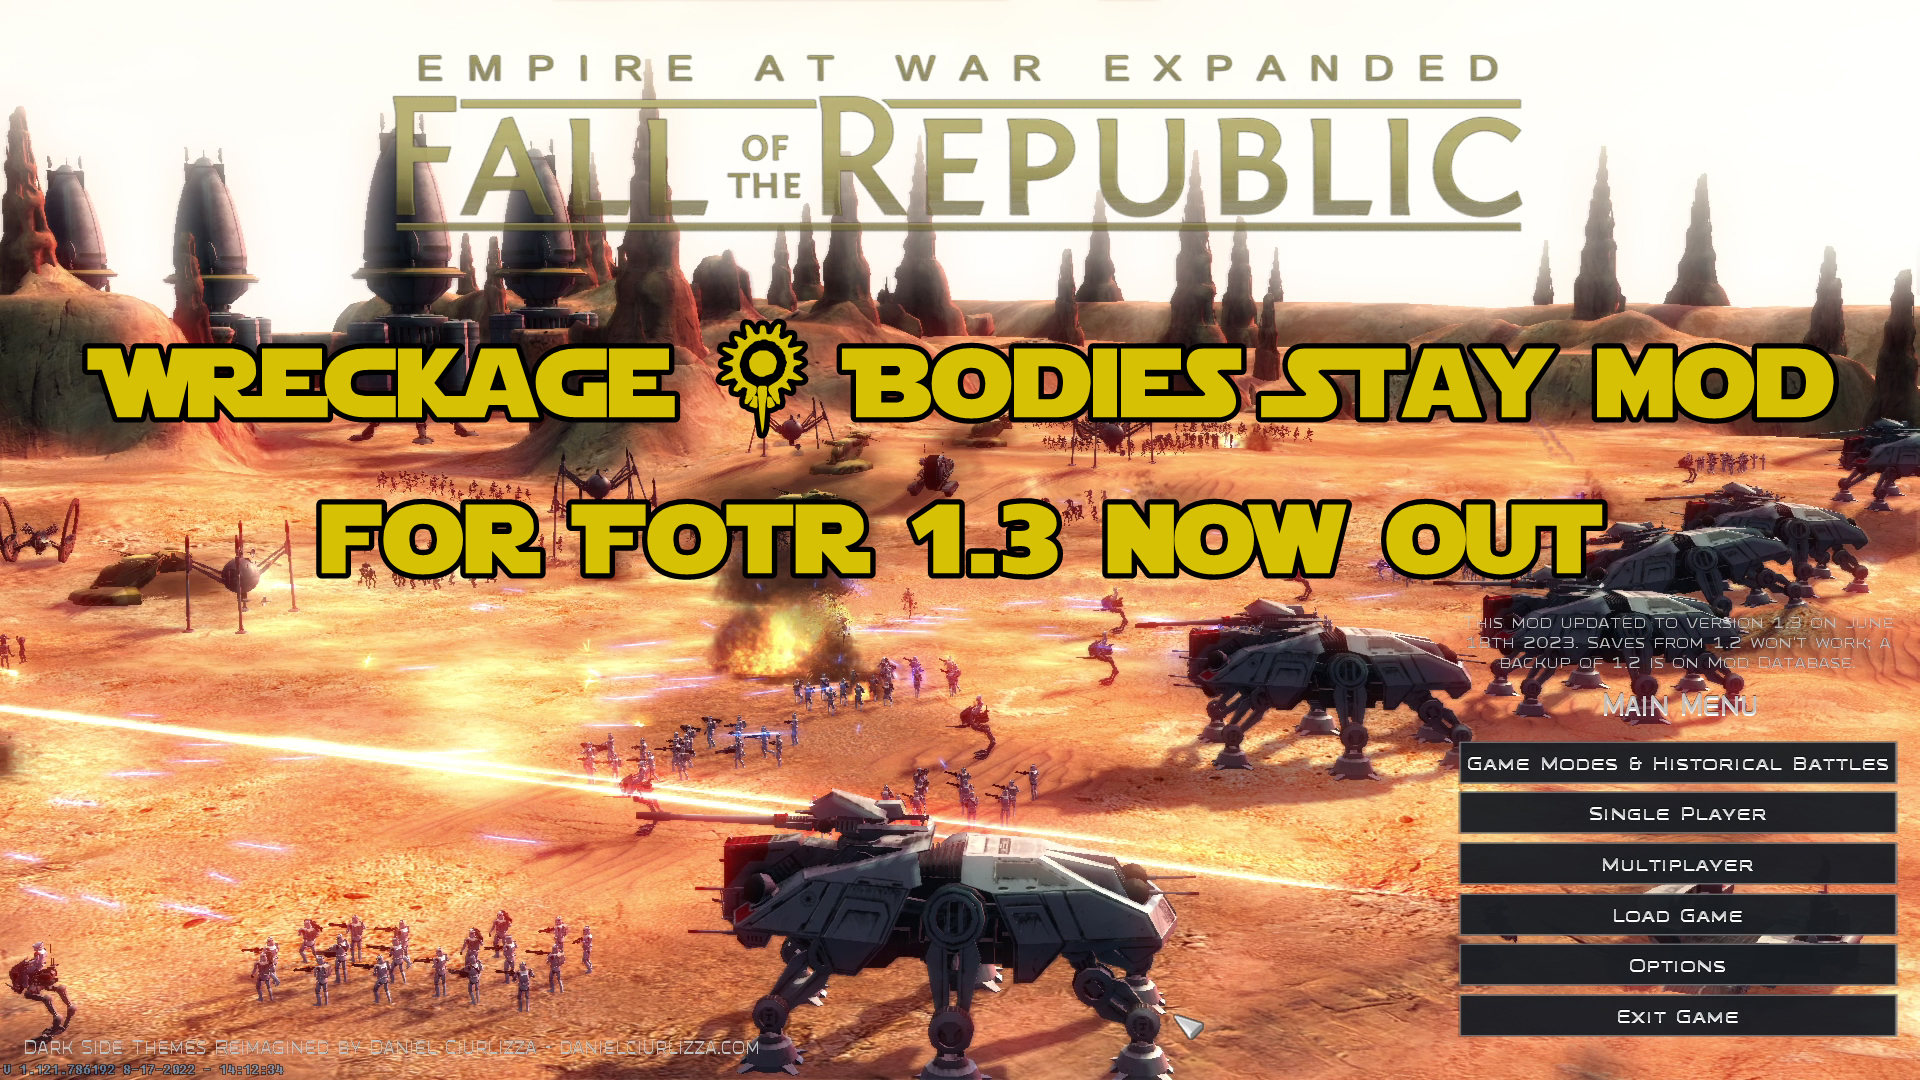 Star wars empire at war forces of corruption таблица cheat engine steam фото 59